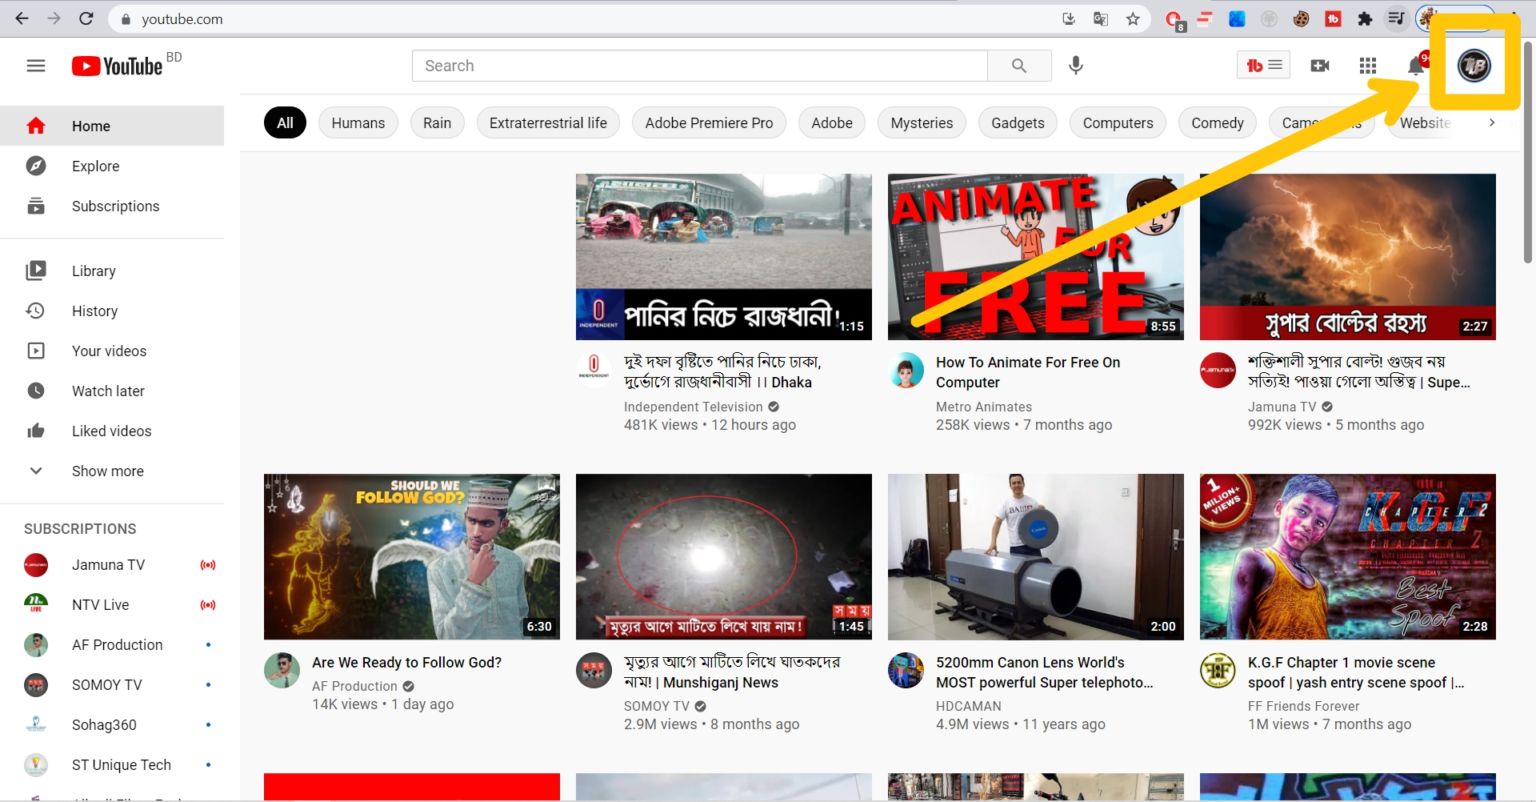 First, login to YouTube with your Gmail. Then click on the place shown in the screenshot